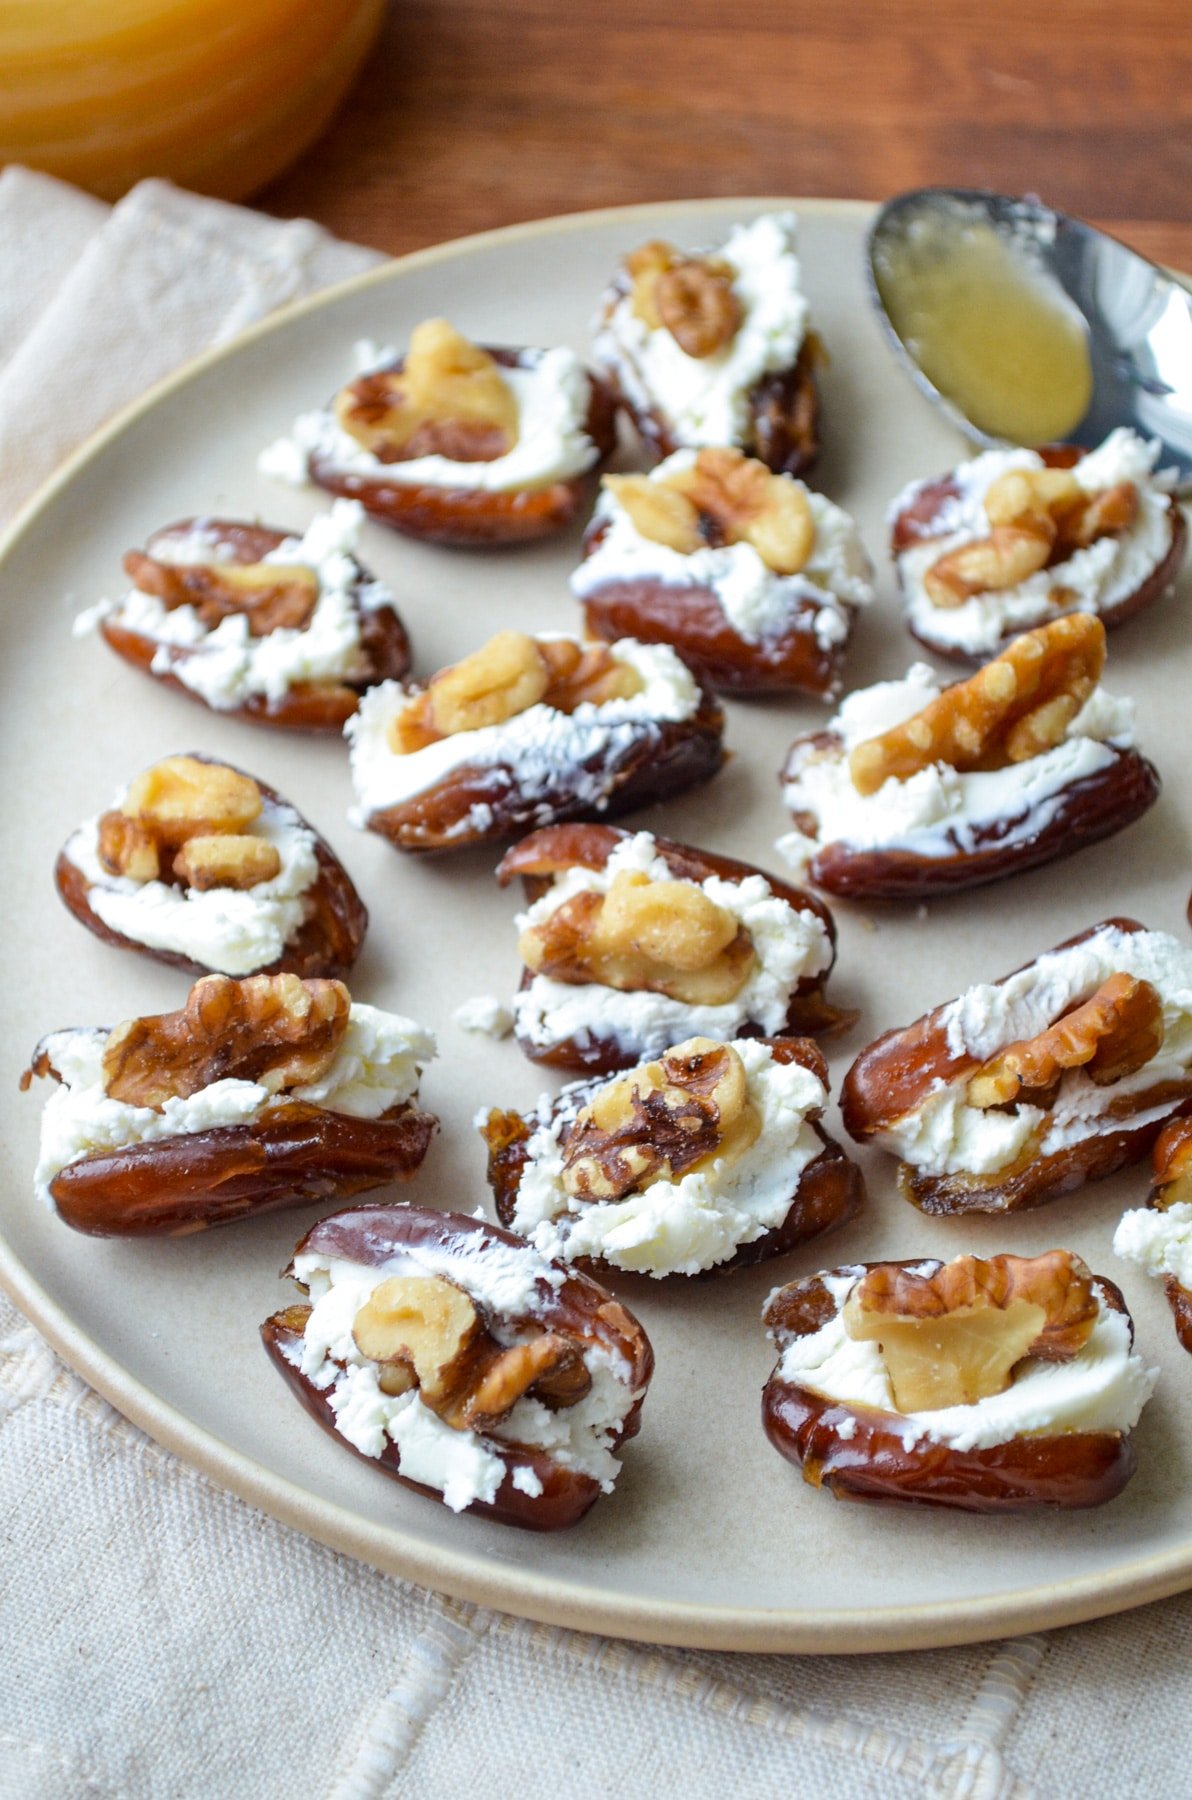 A plate of goat cheese stuffed dates